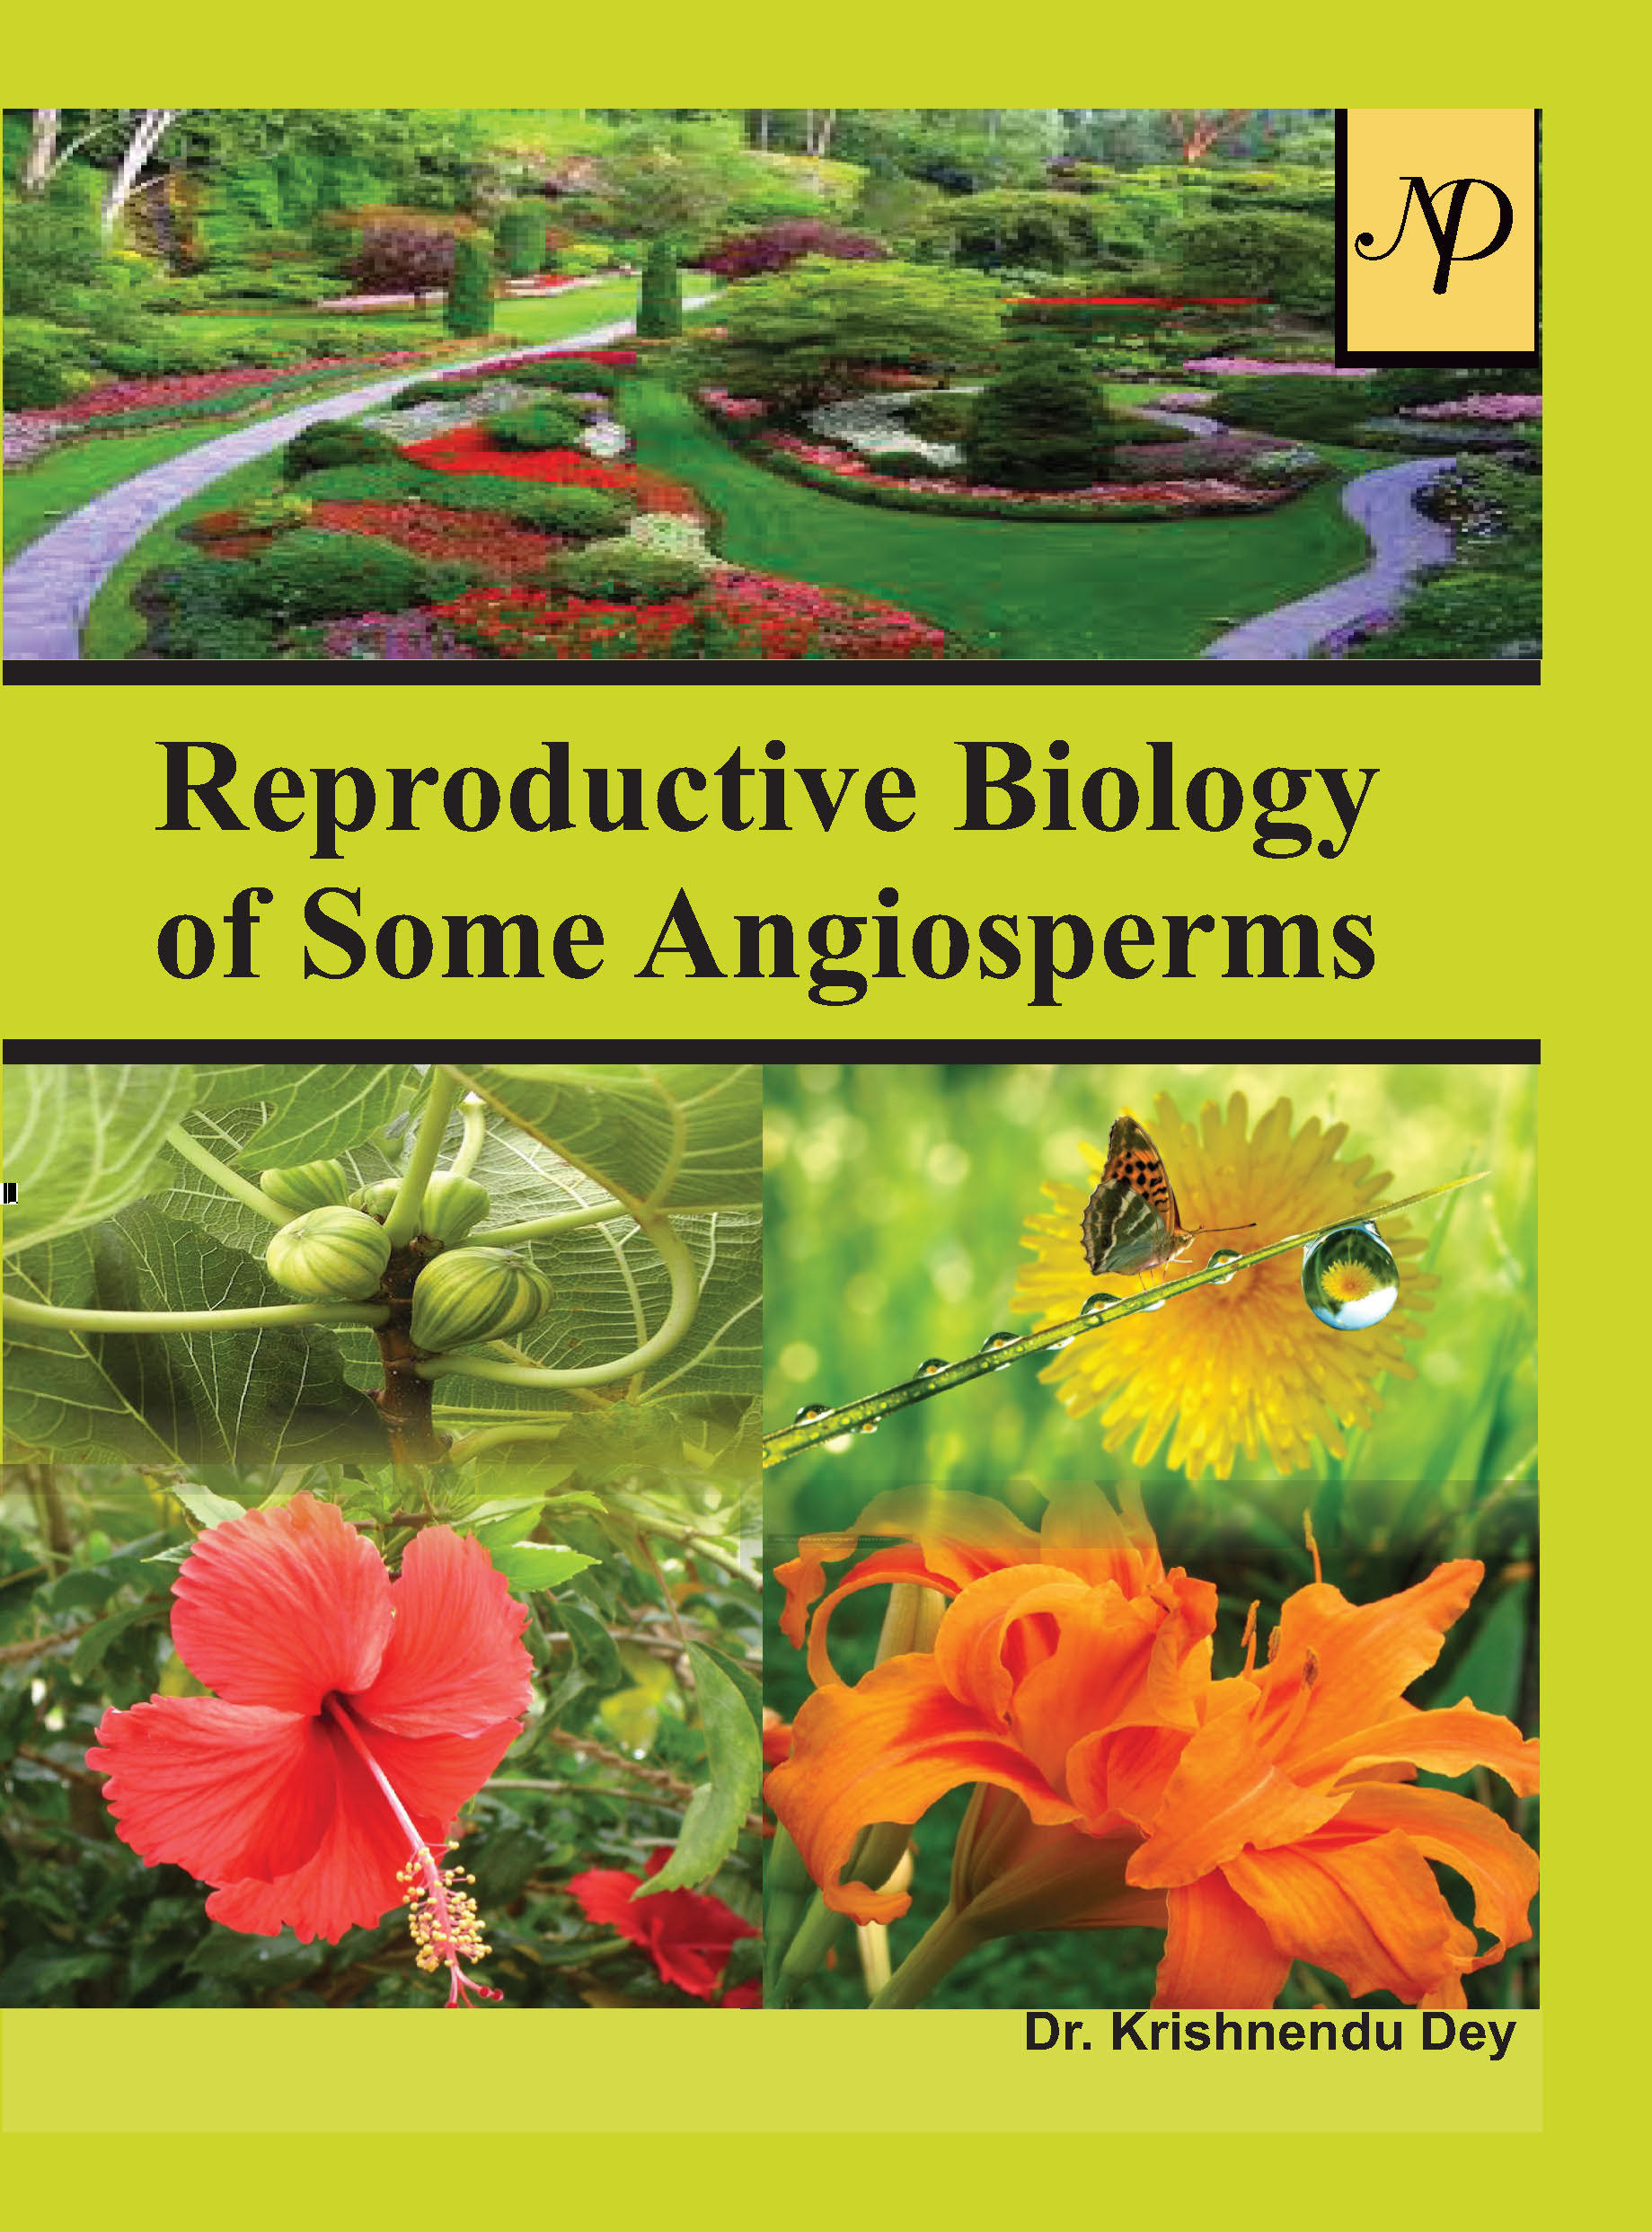 Reproductive Biology of some Angiosperms cover.jpg